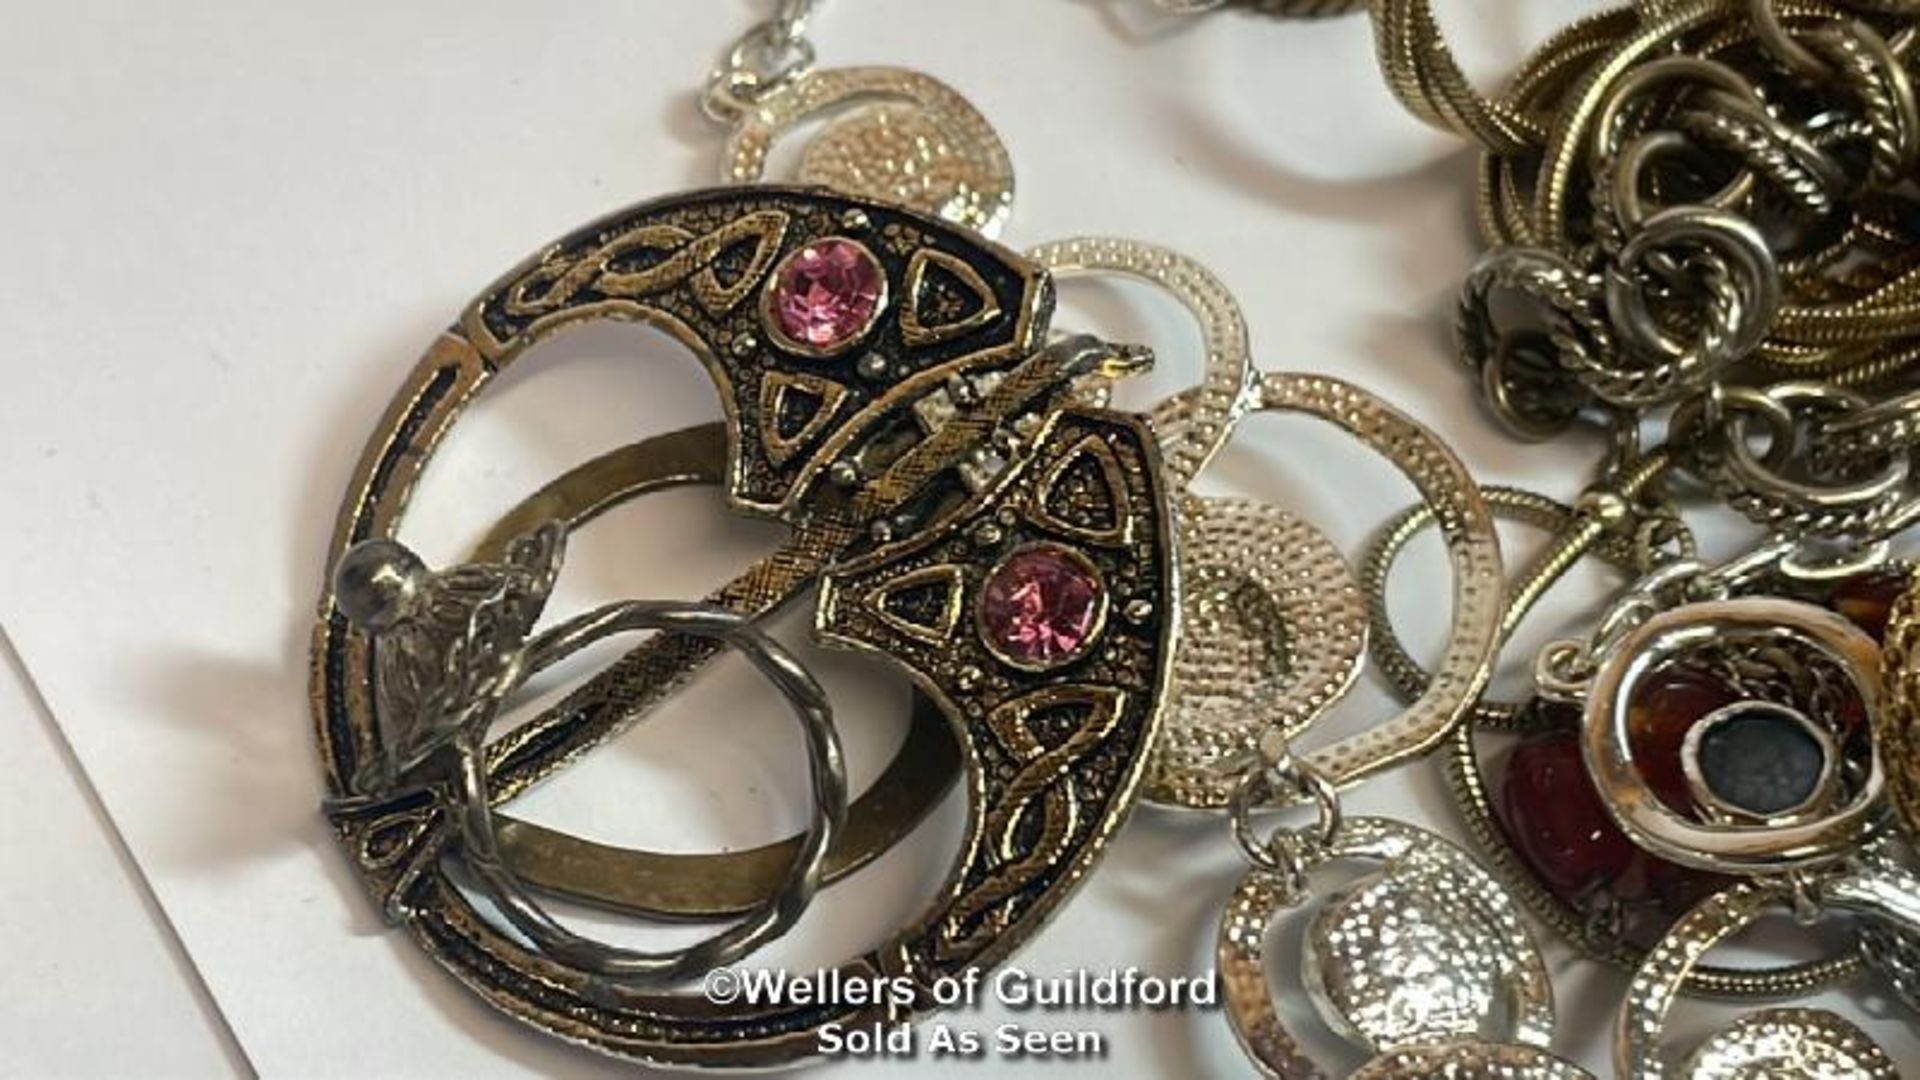 Assorted costume jewellery including brooches, necklaces, bangles and cufflinks - Image 8 of 10